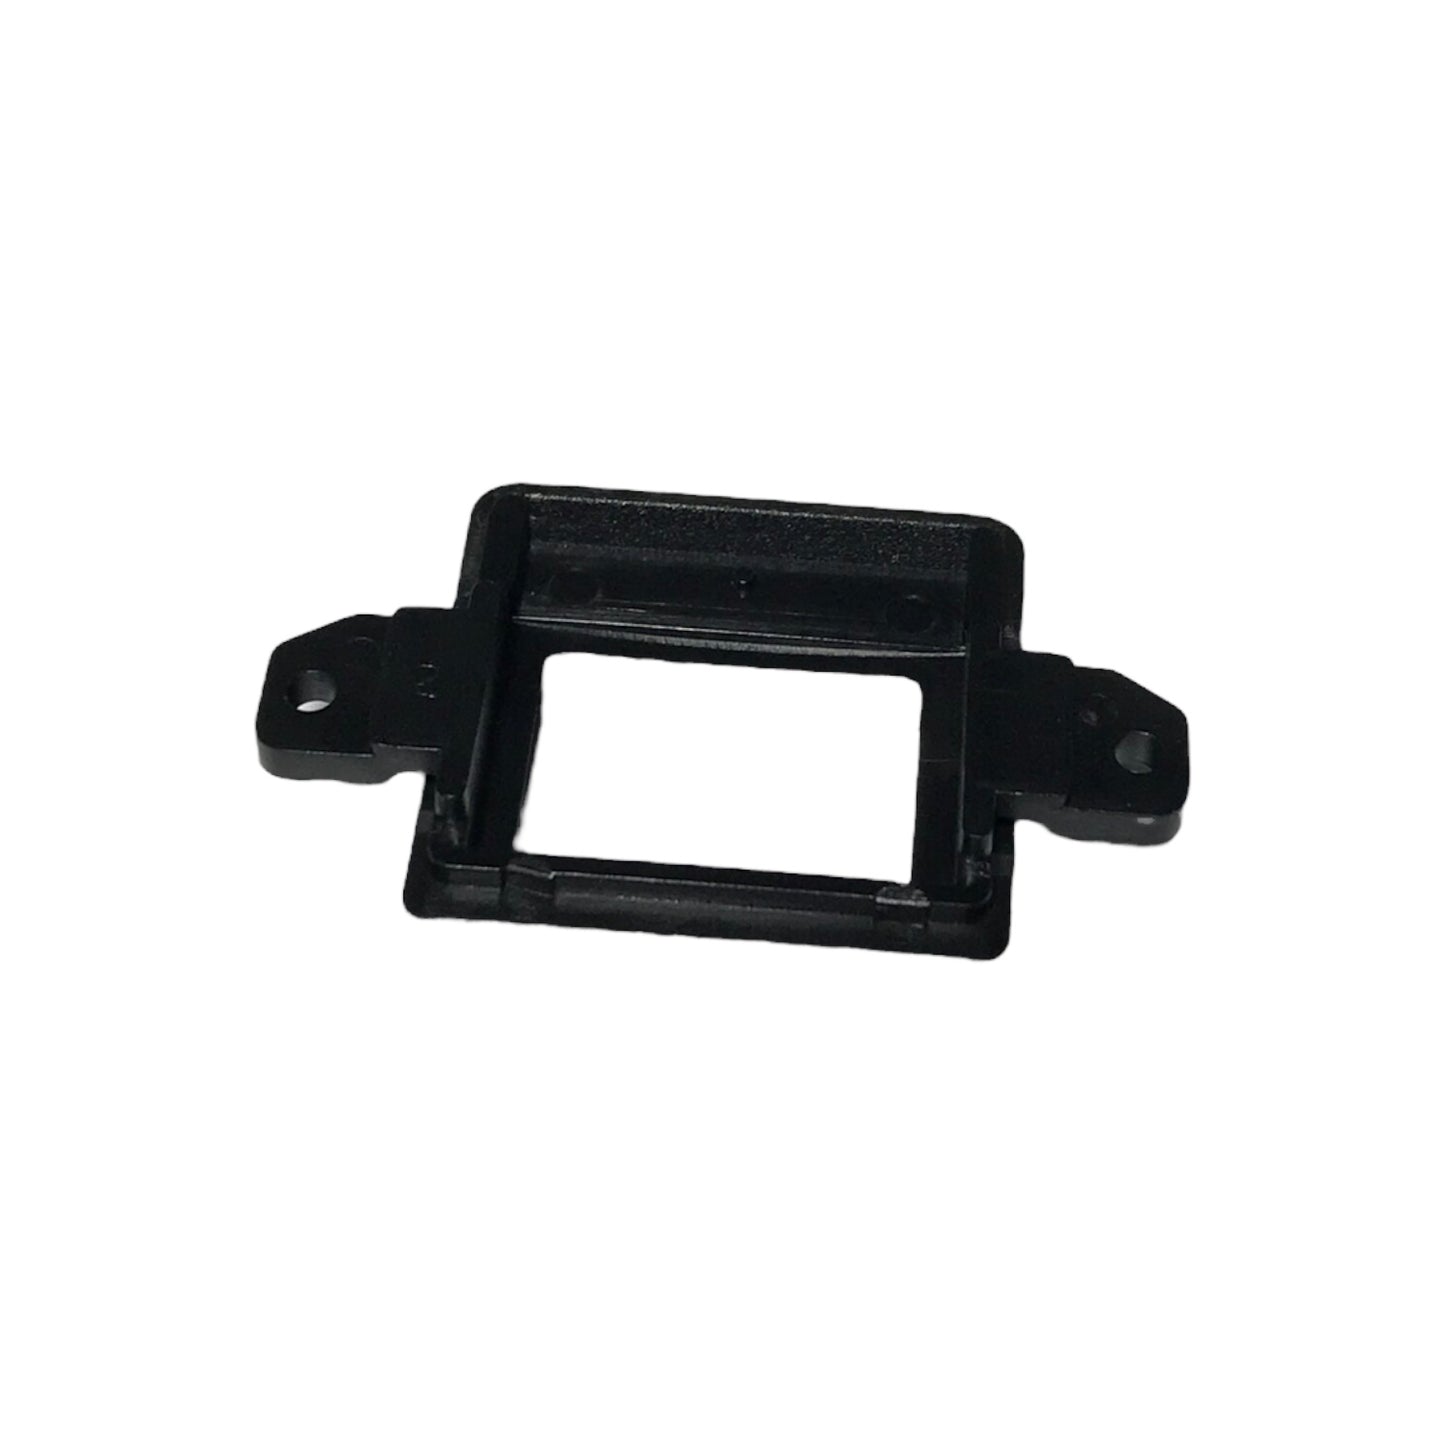 Contax RTS II Plastic Eyepiece Cover (Y)